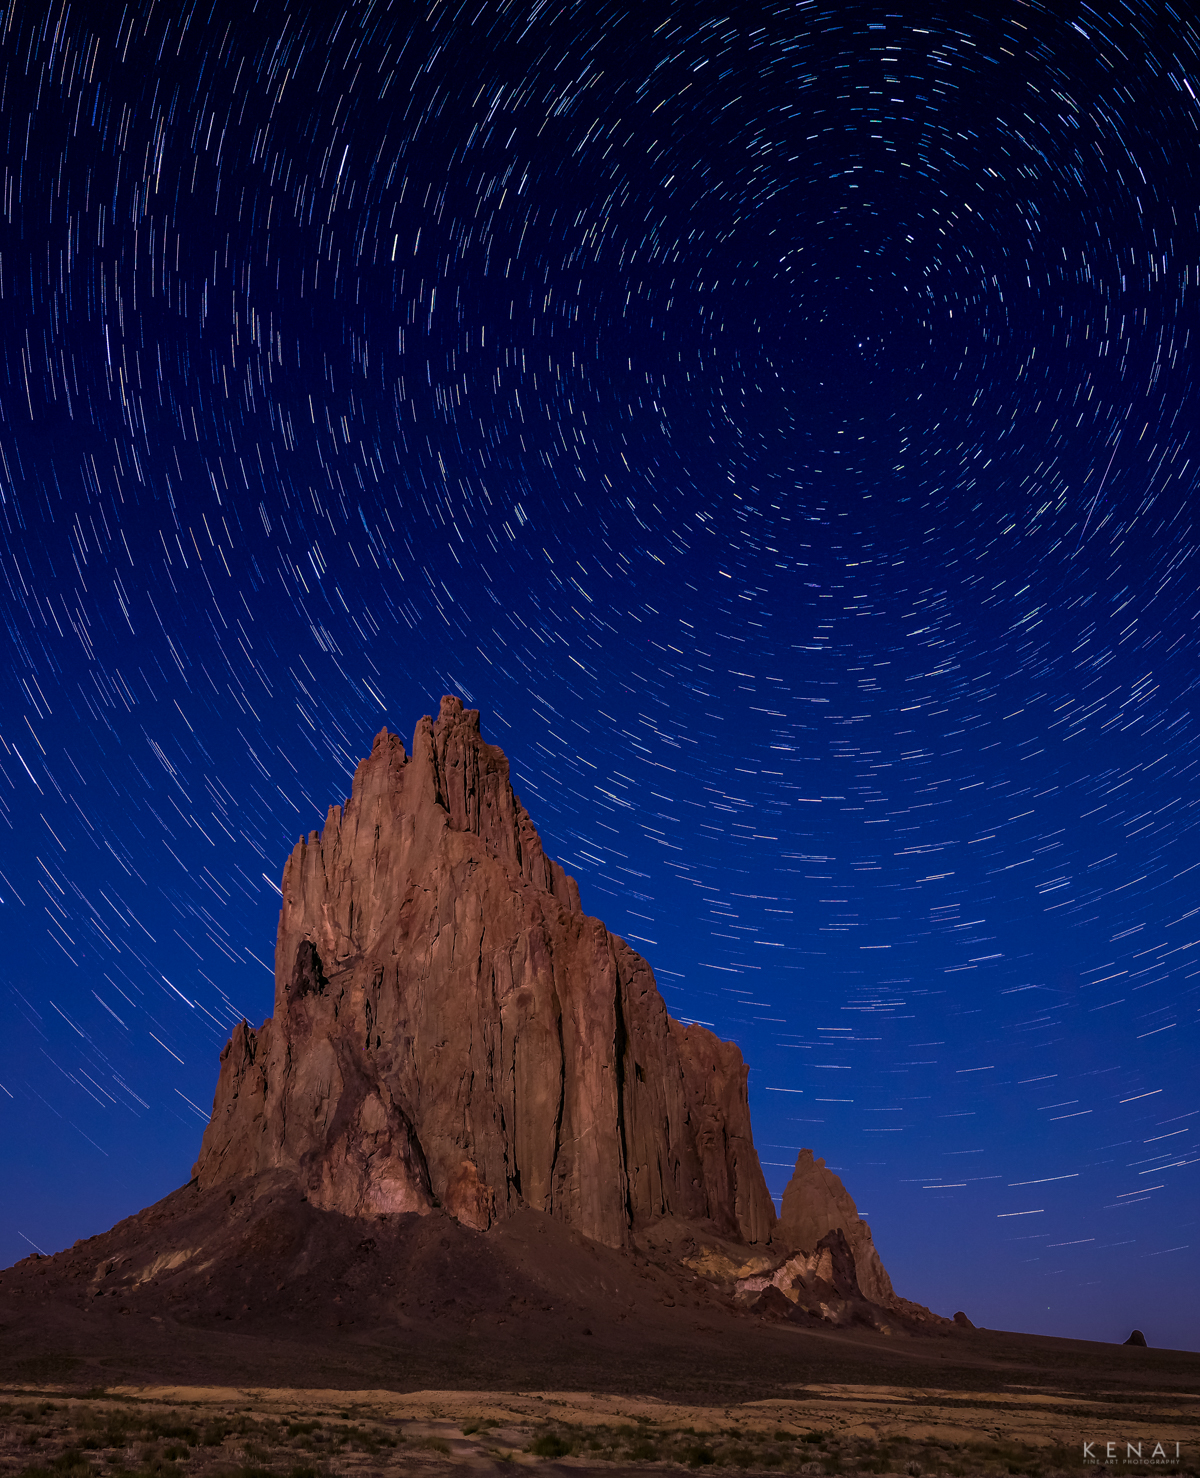 Long exposure, night image of Shiprock, New Mexico with star trails and moonlight in the desert.